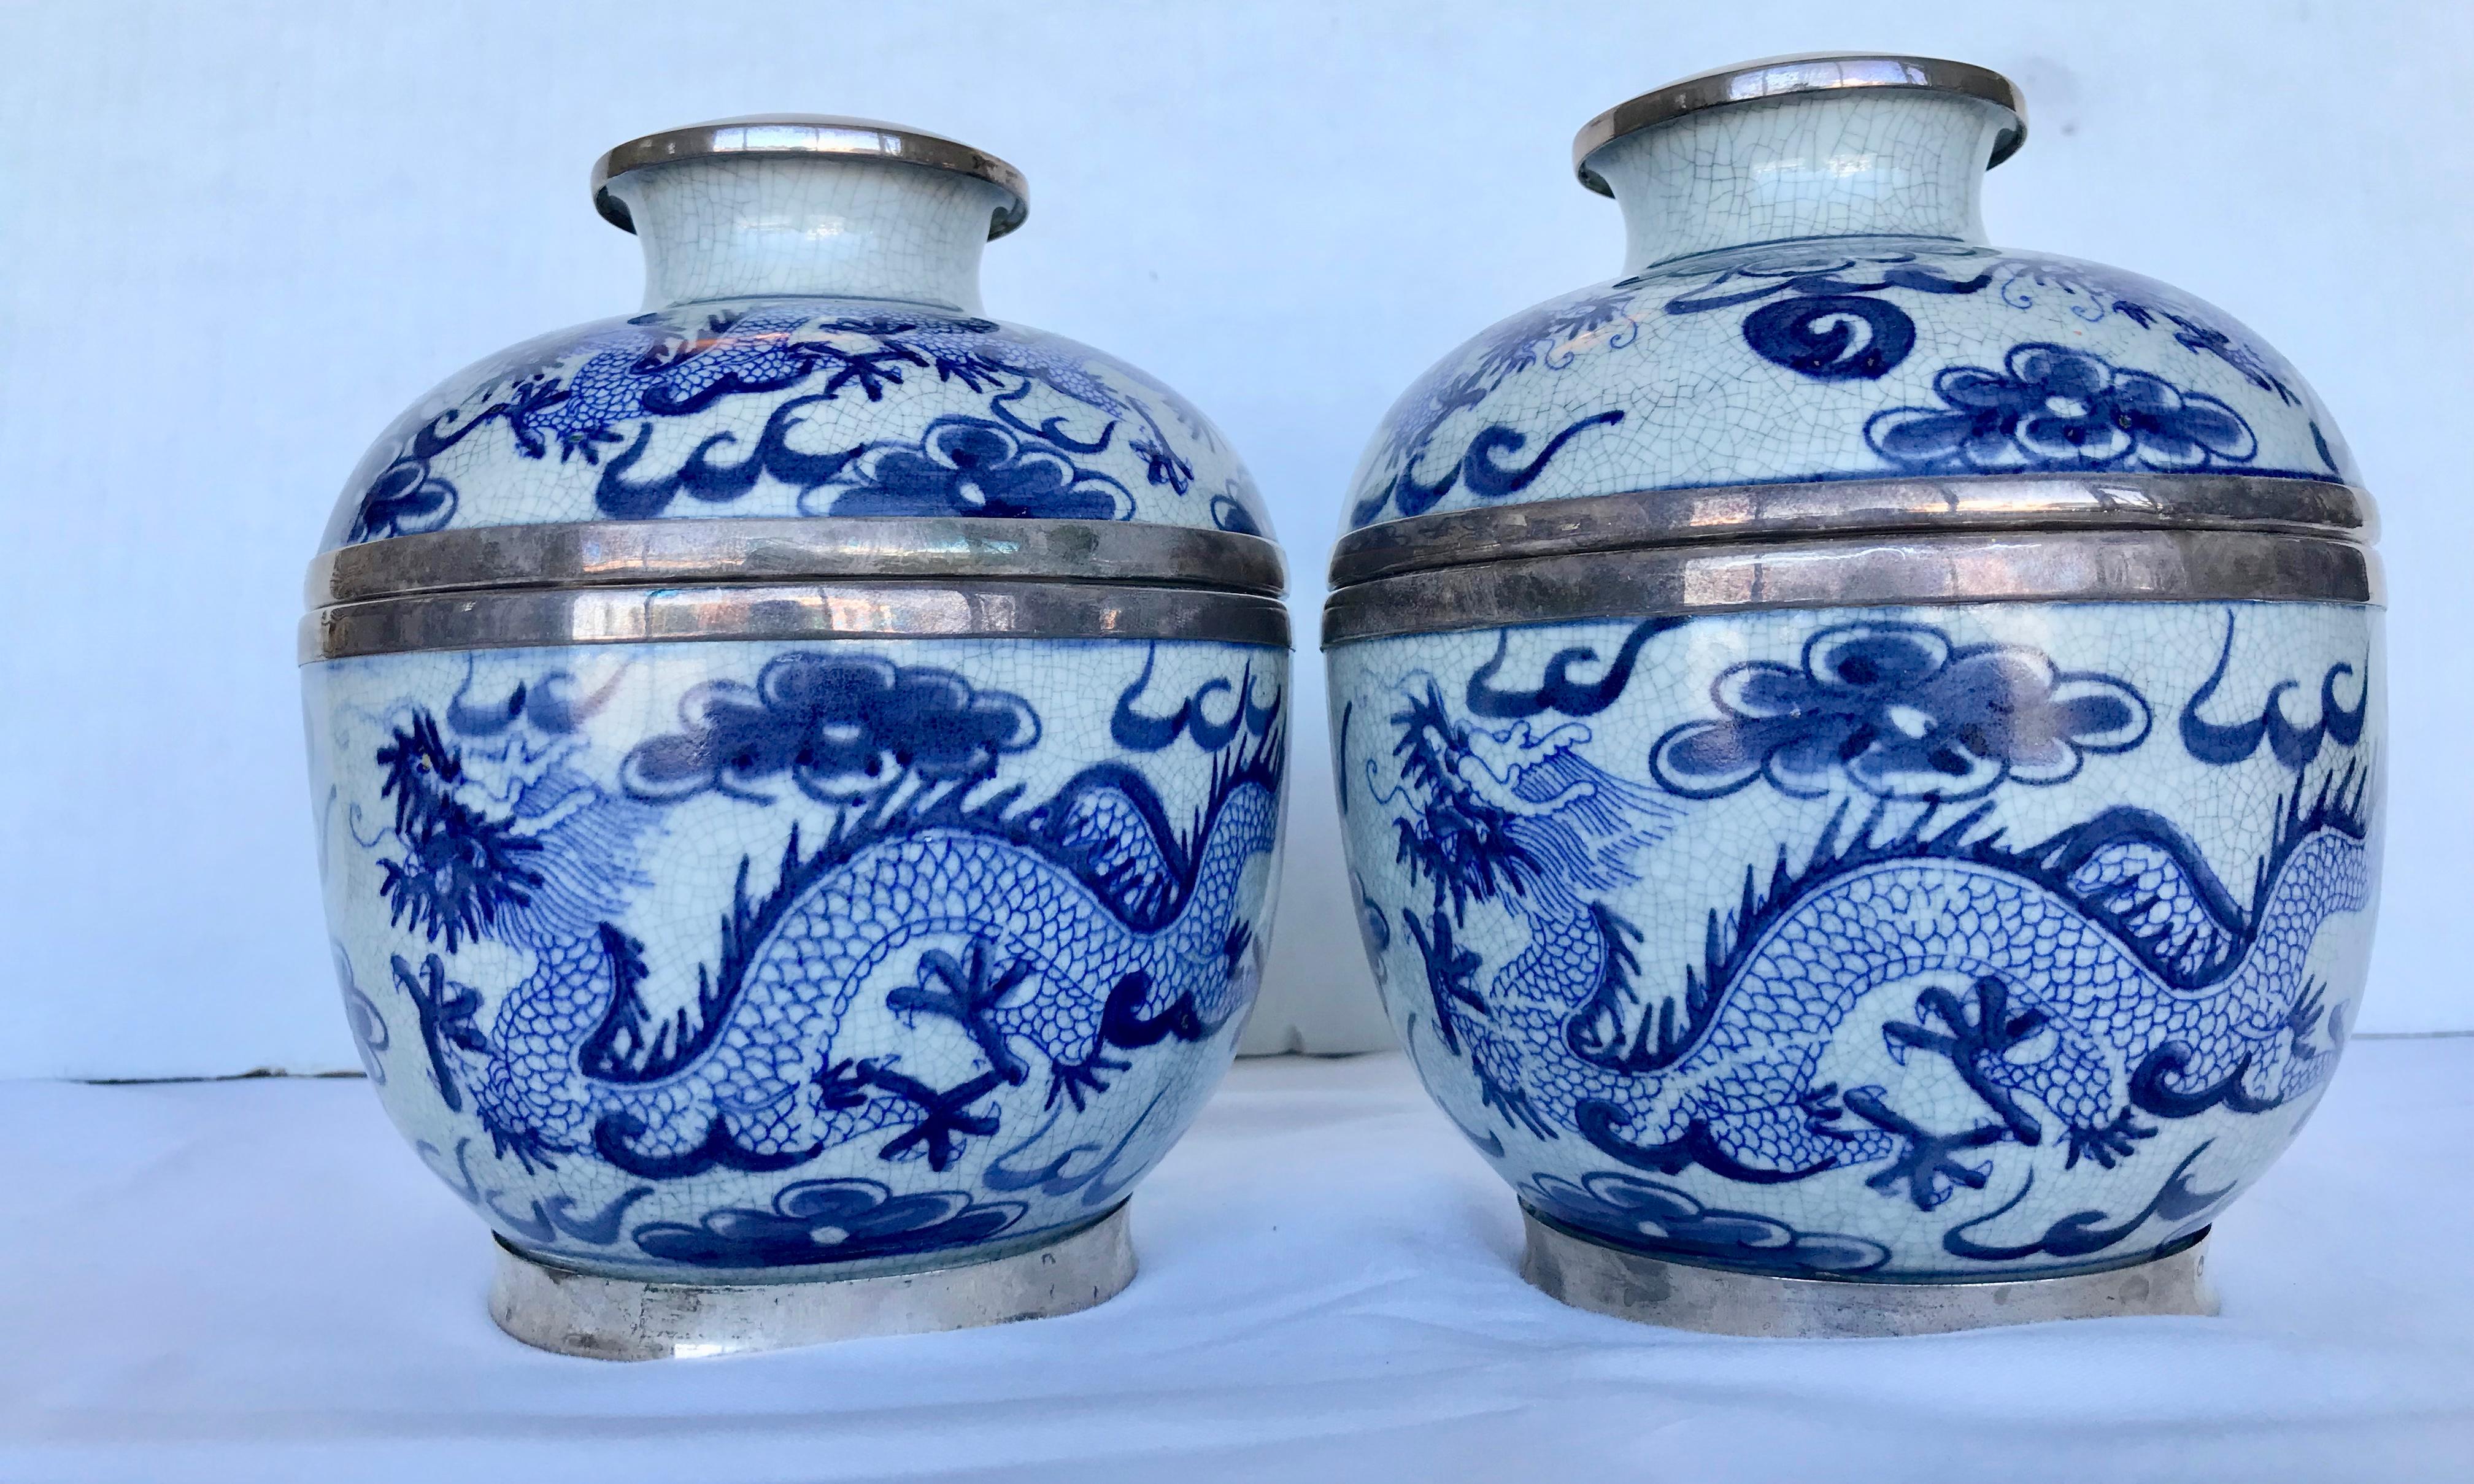 The jars have a 'crackle' glazed finish and are painted with dragons.
A superbly unusual and stunning pair. Lidded.